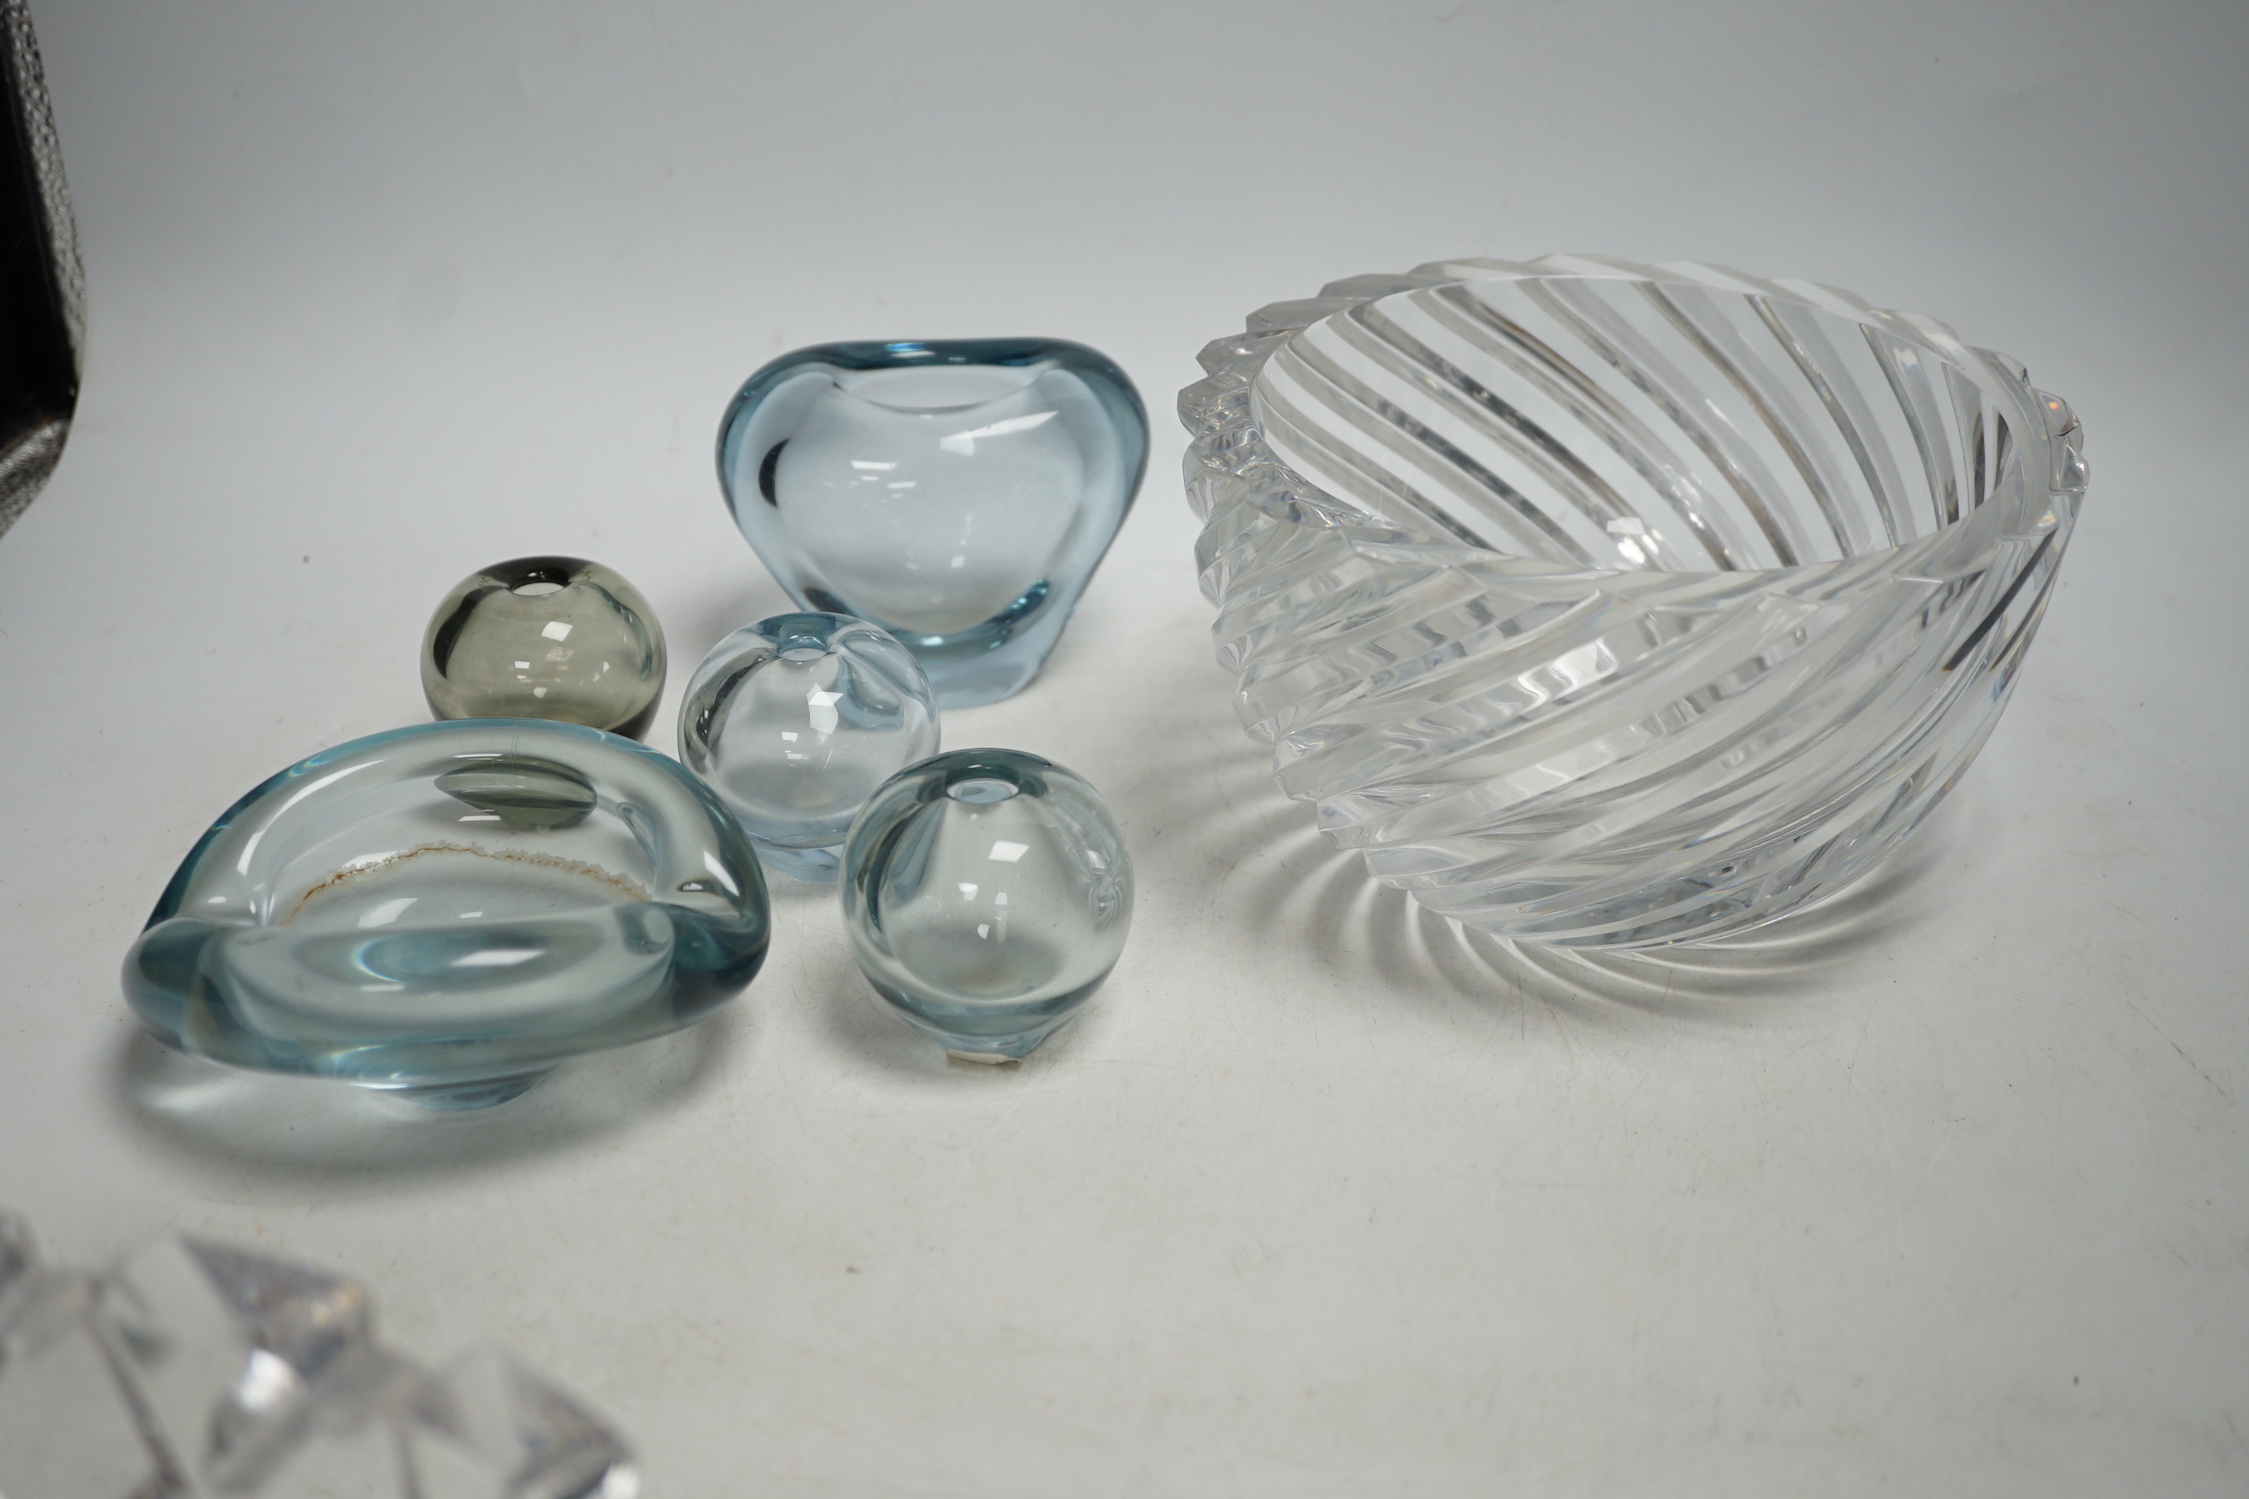 Seven glass items including two Orrefors, Sweden heavy cut glass bowls, one by Jan Johansson, and five smaller glass items by Holmgaard, etc., largest 24cm diameter